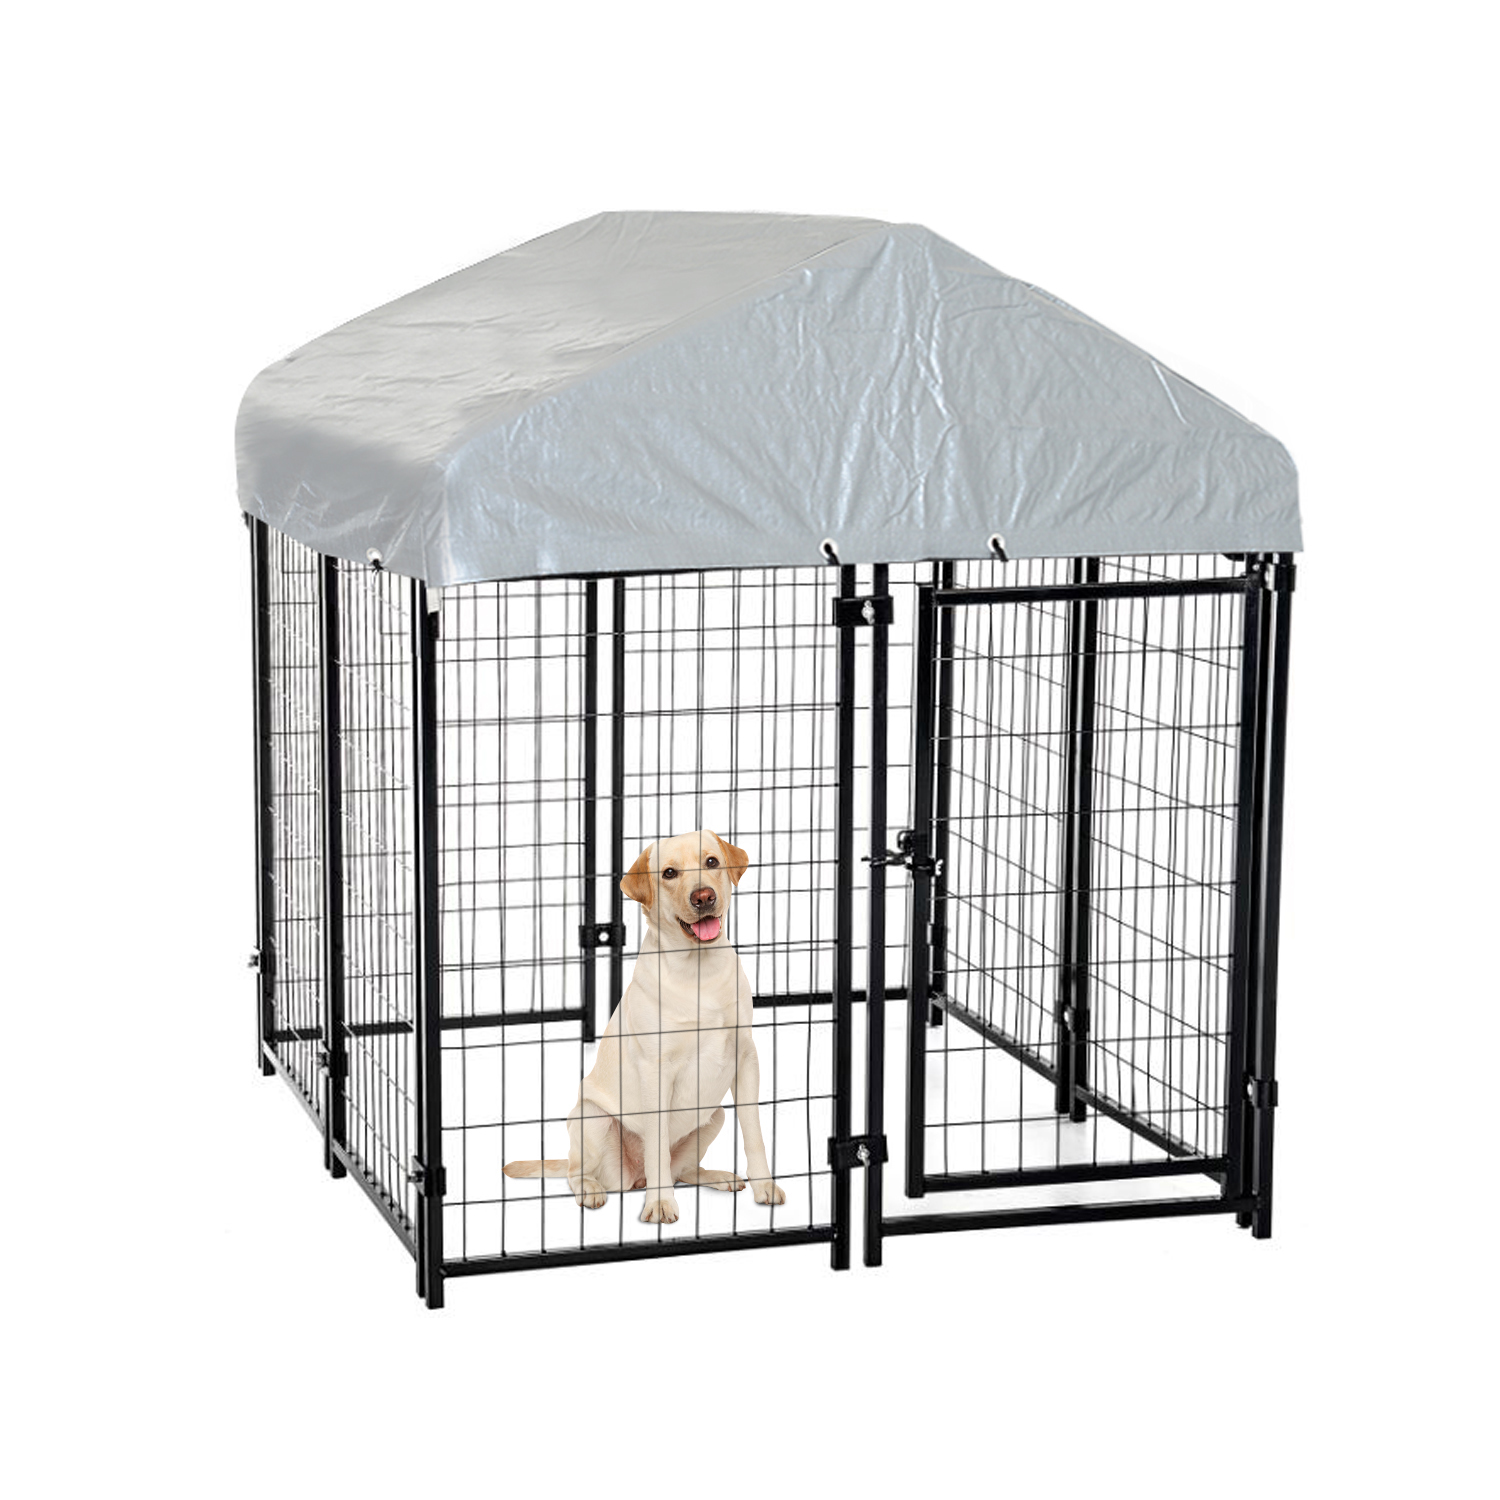 Outdoor Large Dog Cage multiple uses for playing/ exercising /training